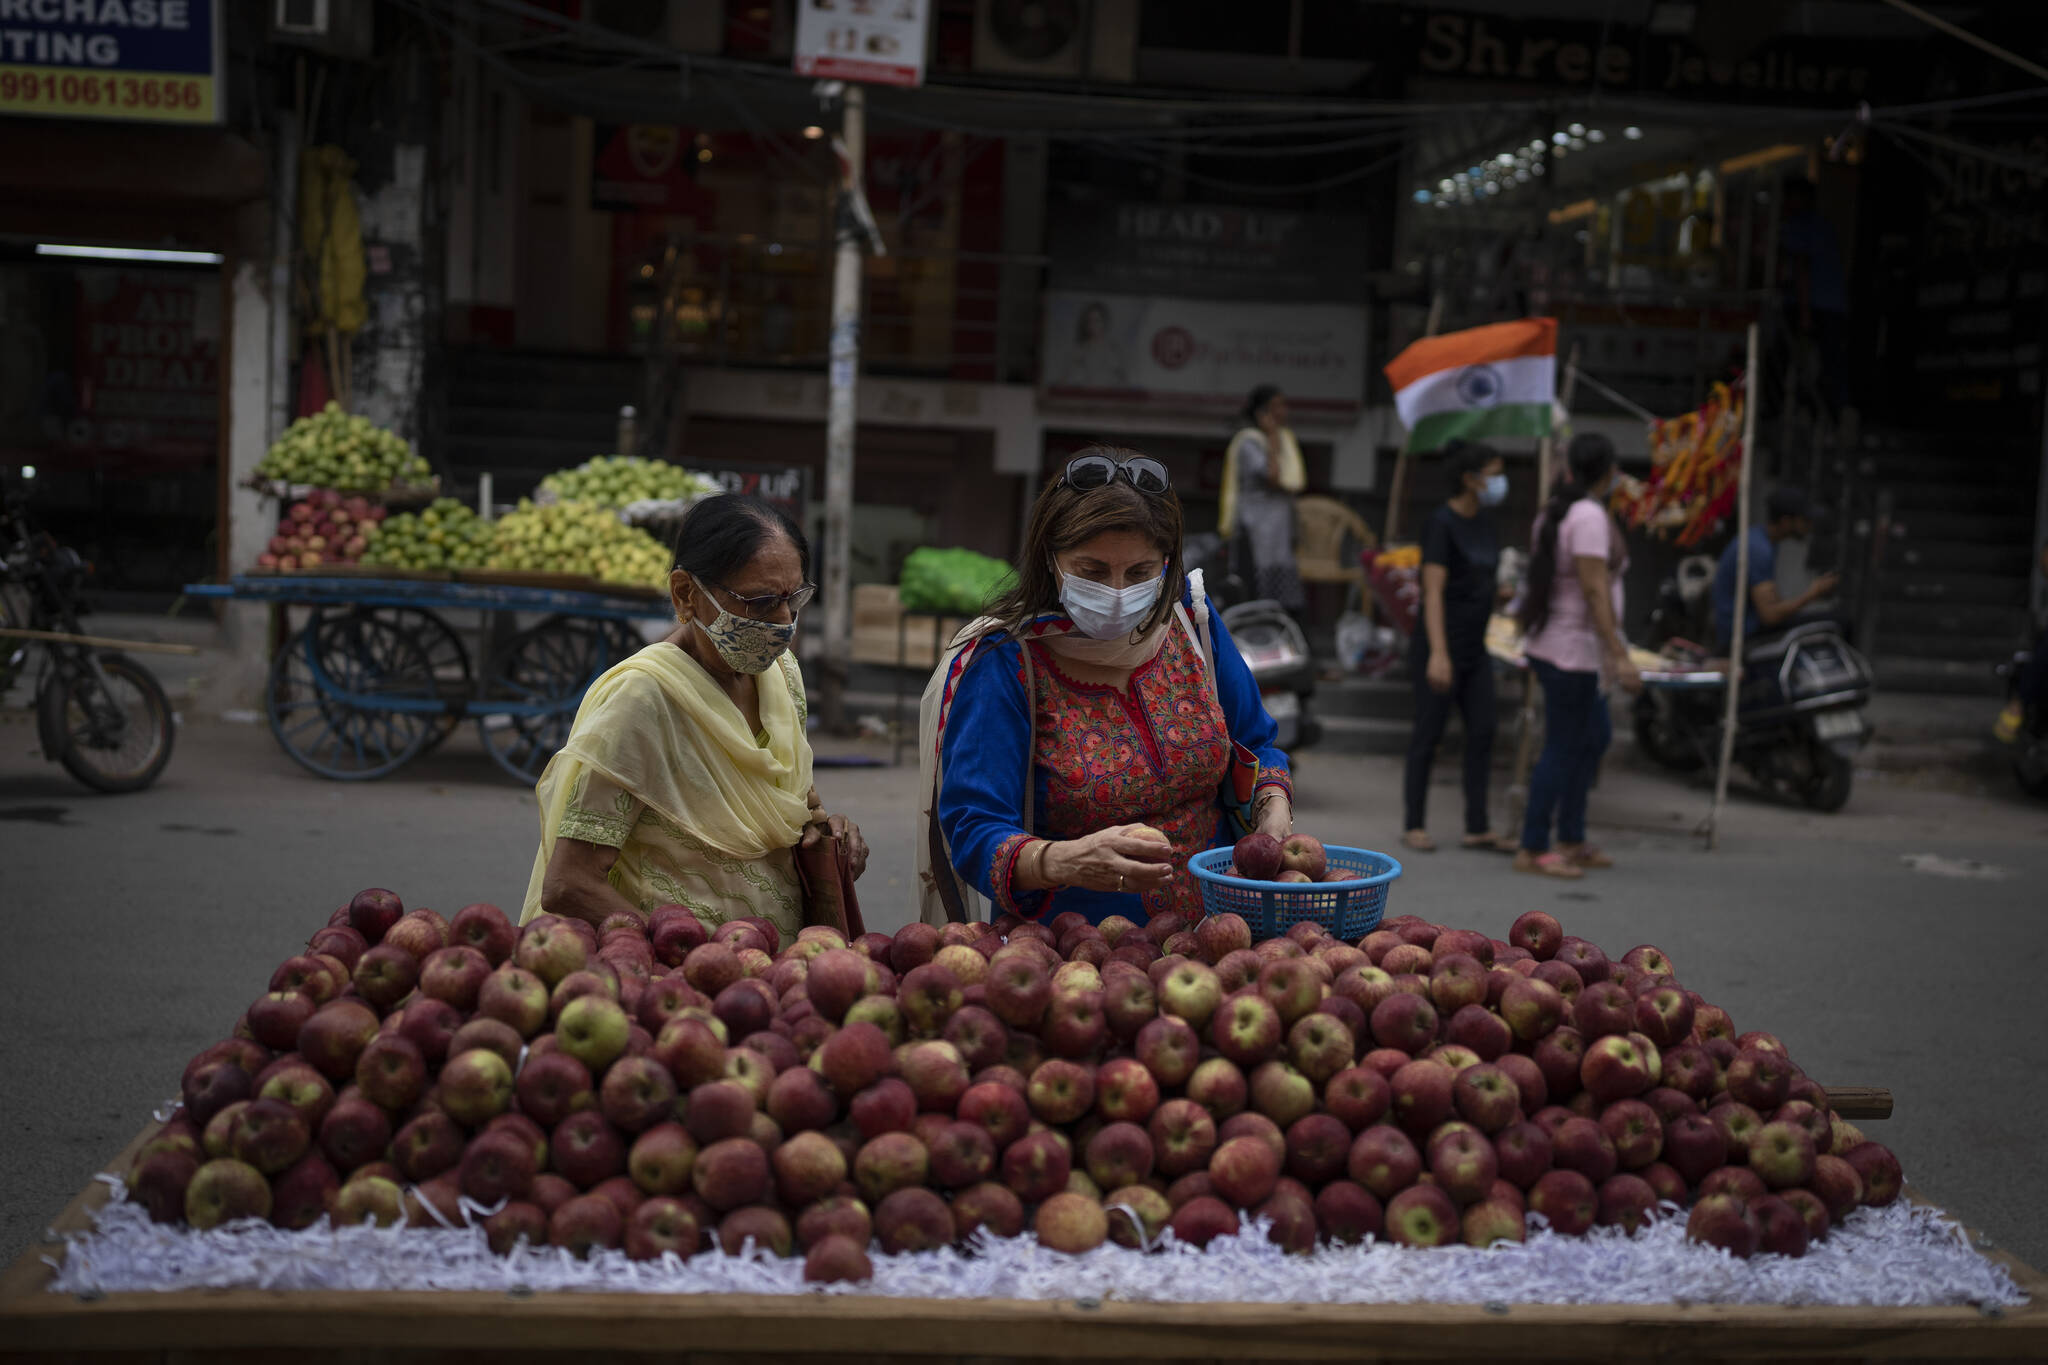 Women wearing masks as a precaution against the coronavirus buy apples from a roadside vendor in New Delhi, India, Thursday, Aug. 11, 2022. The Indian capital reintroduced public mask mandates on Thursday as COVID-19 cases continue to rise across the country. (AP Photo/Altaf Qadri)